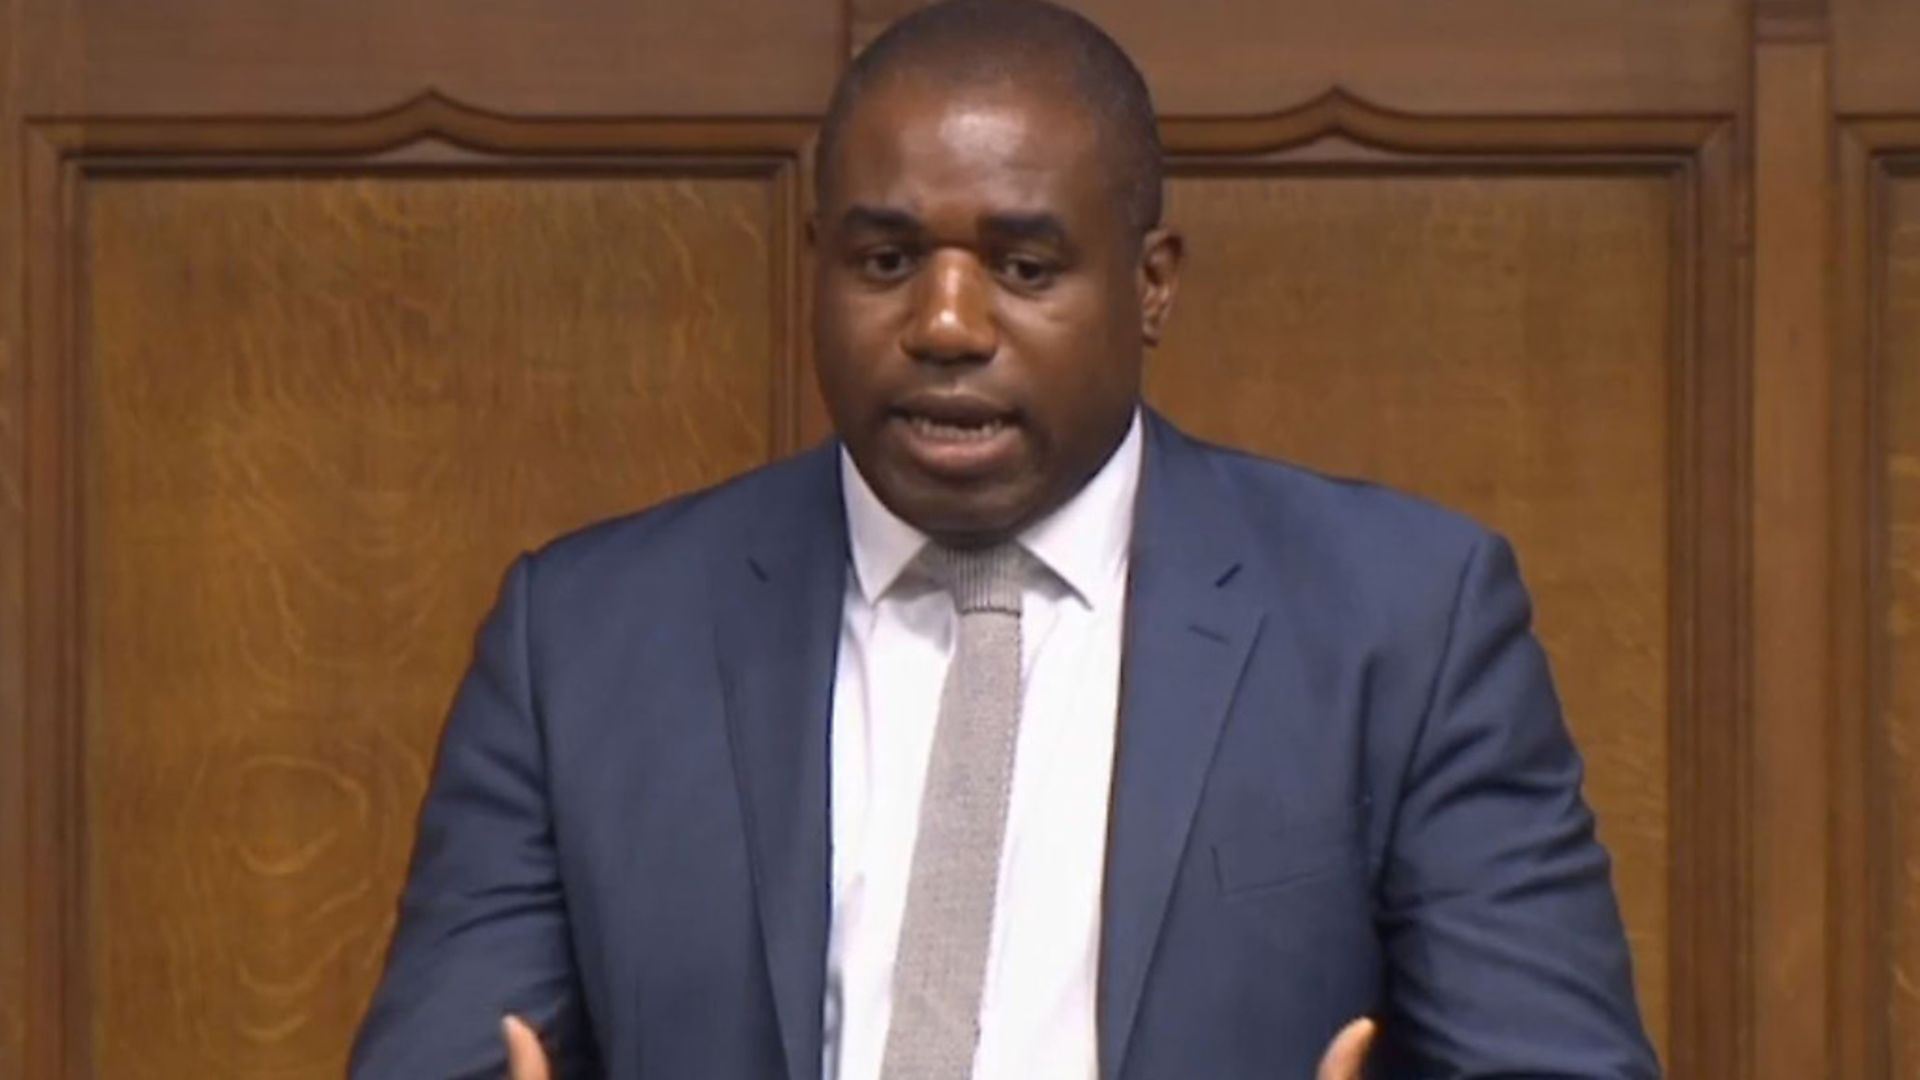 Labour's MP for Tottenham, David Lammy, in the House of Commons. Photograph: PA. - Credit: PA Archive/PA Images